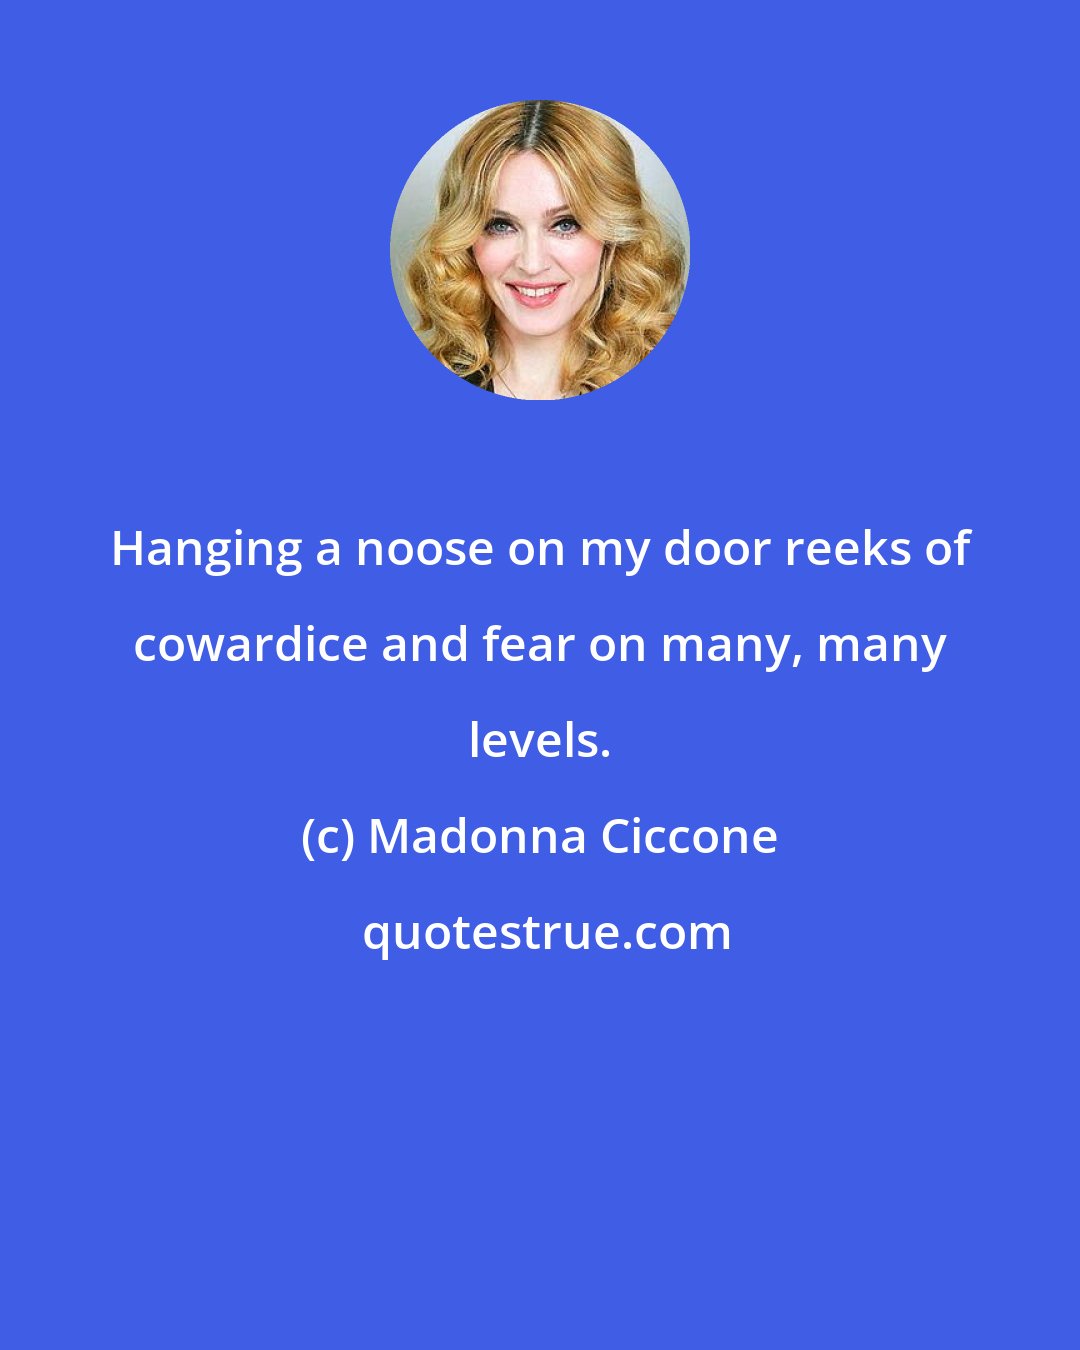 Madonna Ciccone: Hanging a noose on my door reeks of cowardice and fear on many, many levels.